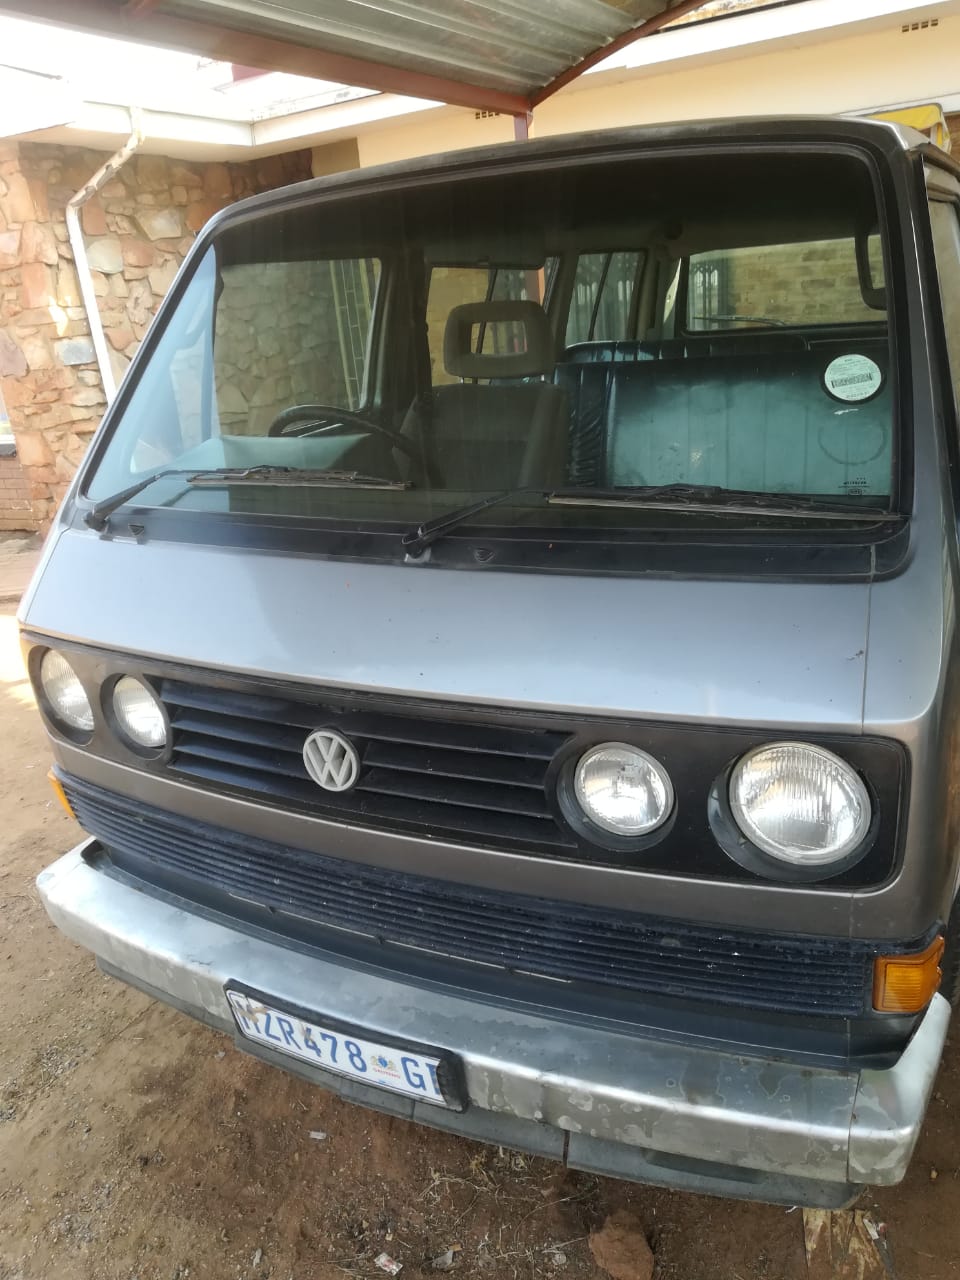 VW microbus for sale